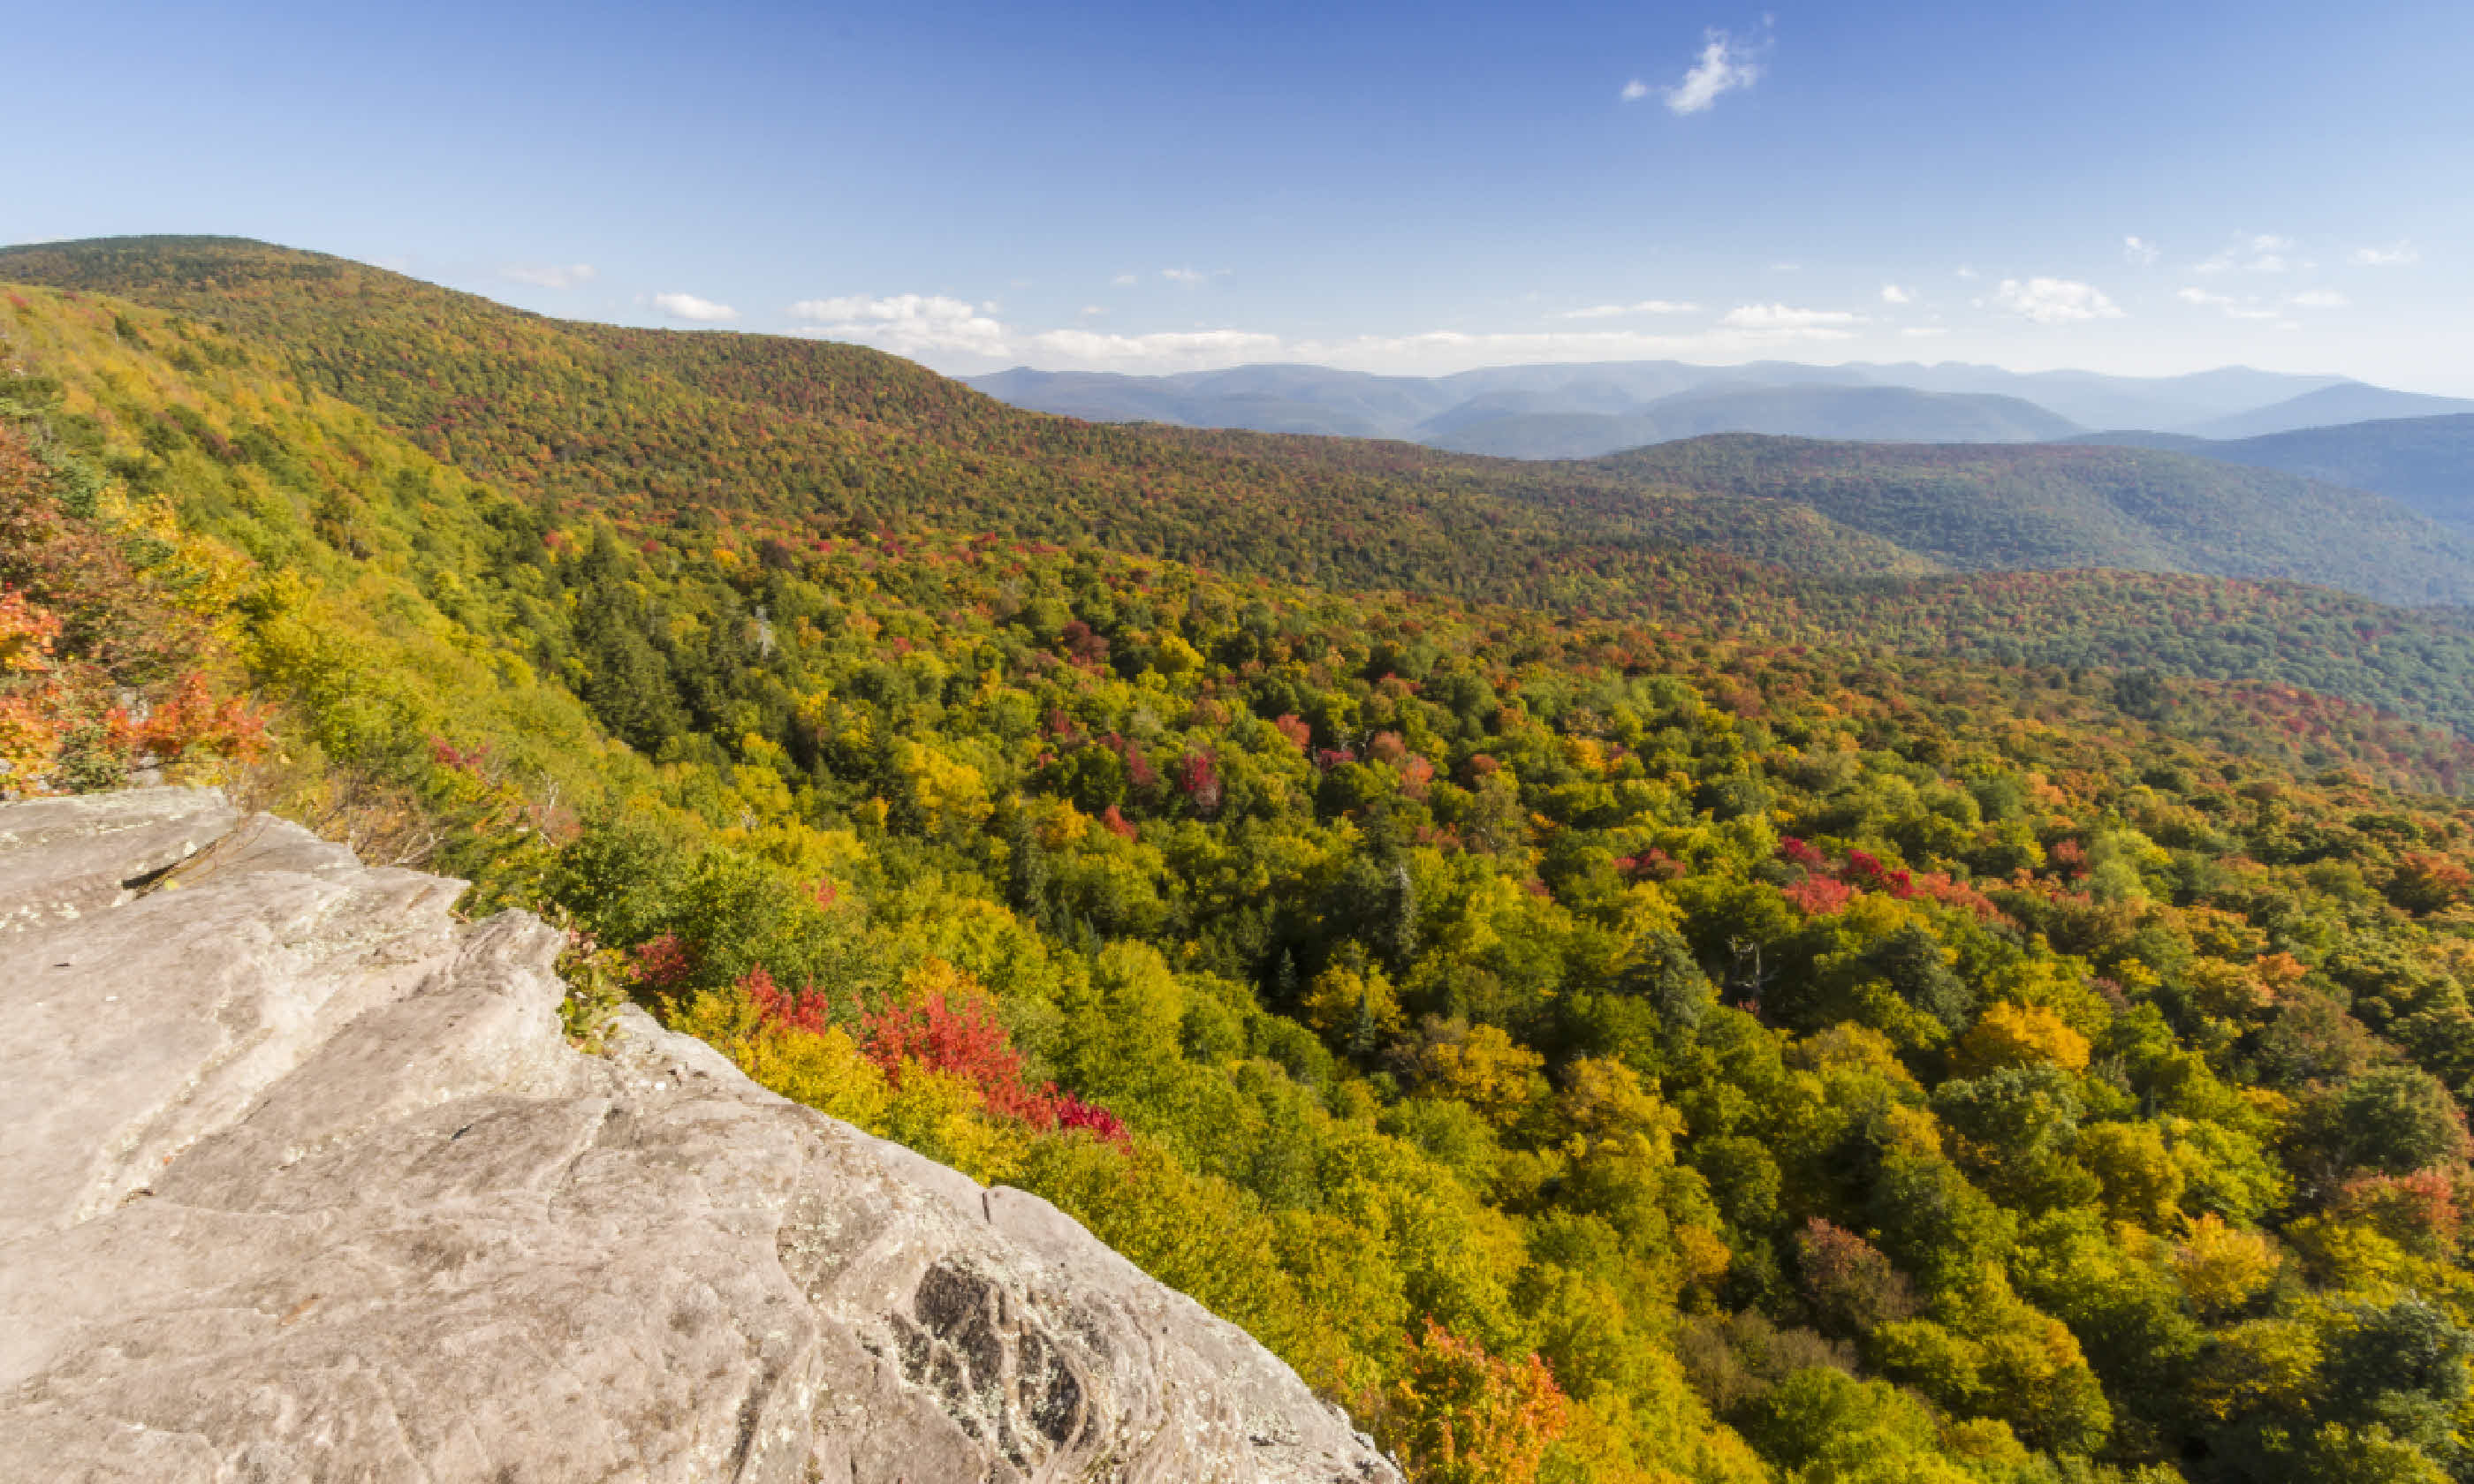 Giant Ledge in the Catskills Mountains (Shutterstock)